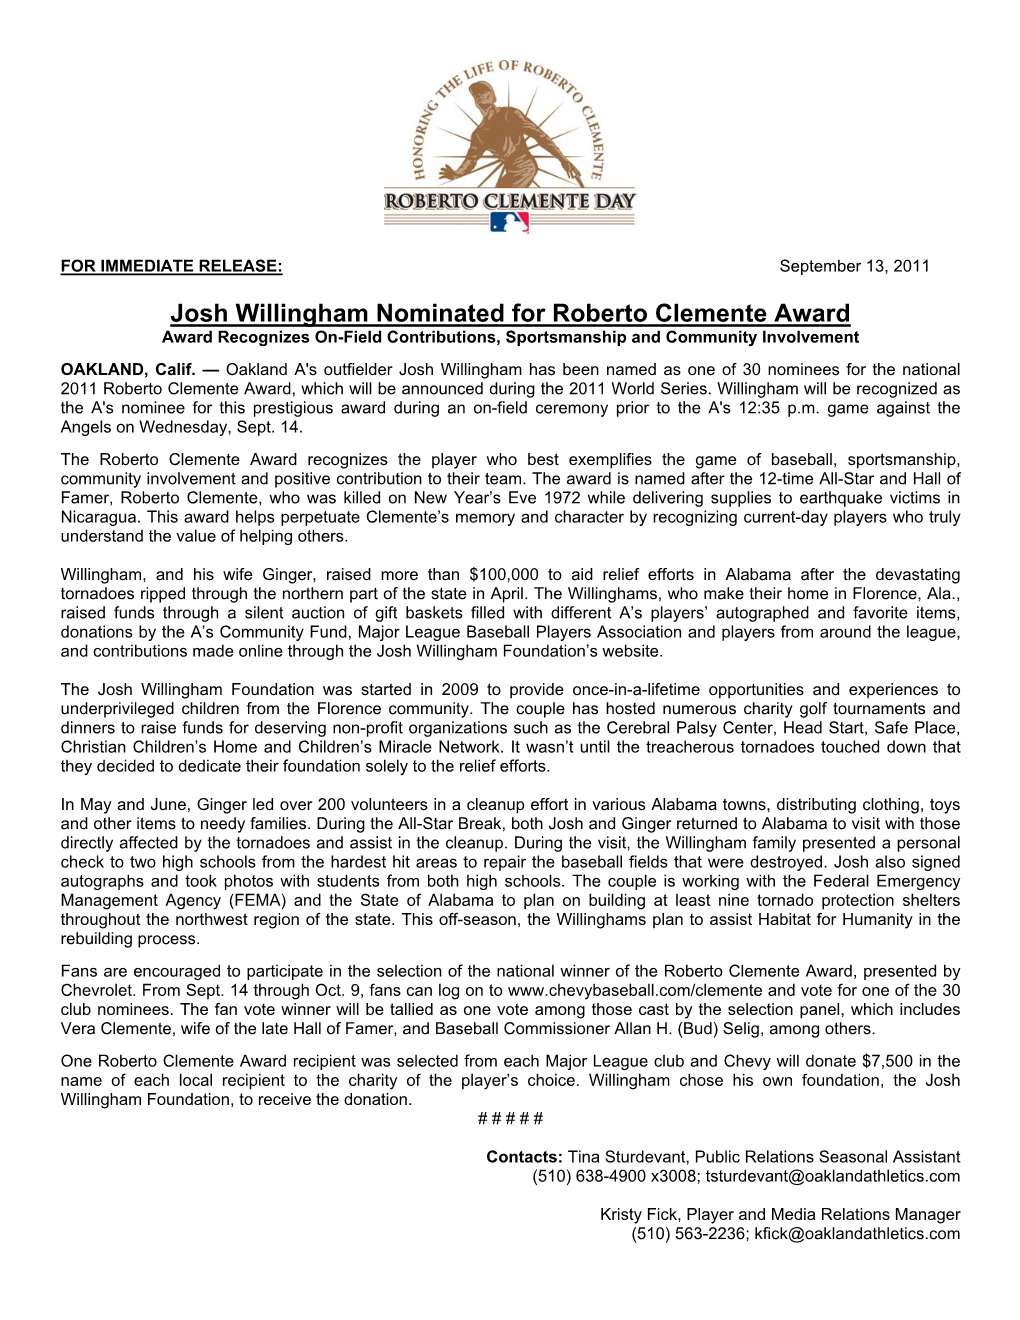 Josh Willingham Nominated for Roberto Clemente Award Award Recognizes On-Field Contributions, Sportsmanship and Community Involvement OAKLAND, Calif